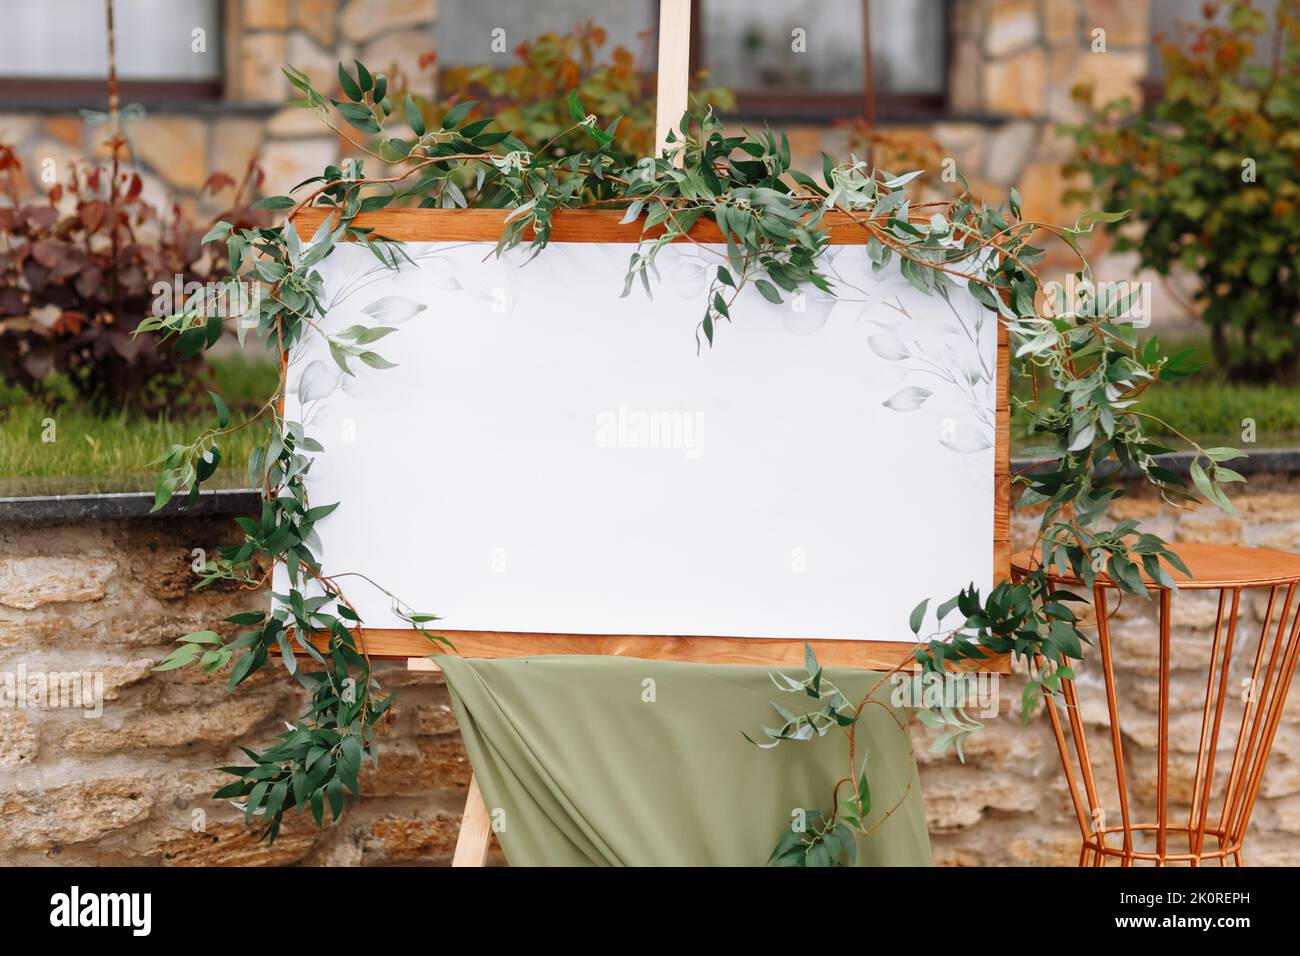 Wedding wooden board, mockup, invitation easel, with white space for an inscription, decorated with fresh greenery and green cloth. Wedding frame outd Stock Photo